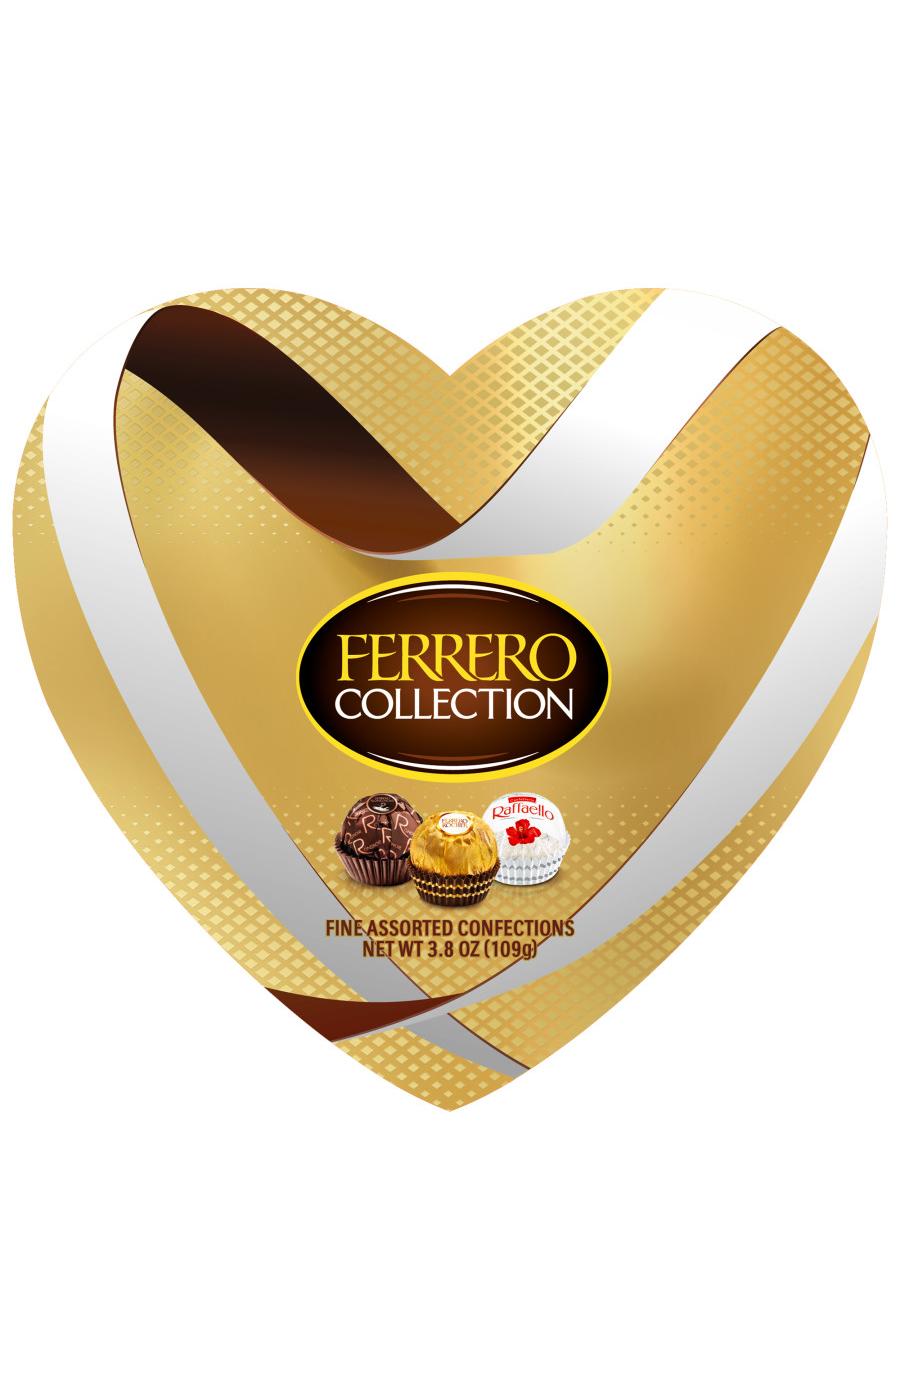 Ferrero Collection Fine Assorted Confections Valentine's Heart Gift Box, 10 Pc; image 1 of 2